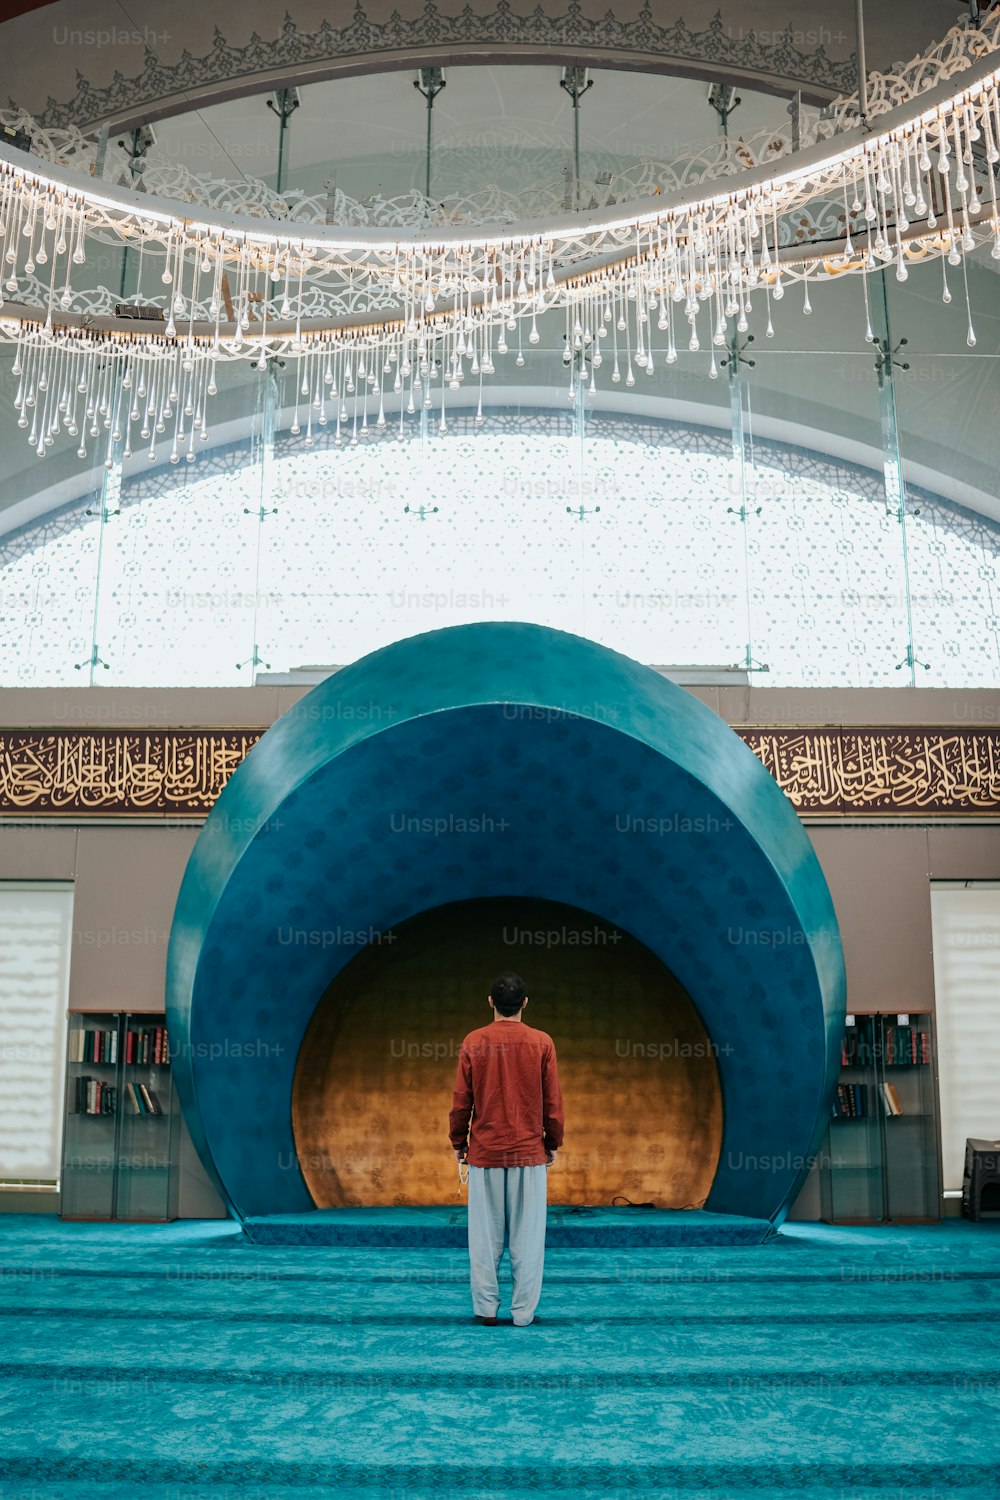 a man standing in front of a large blue object